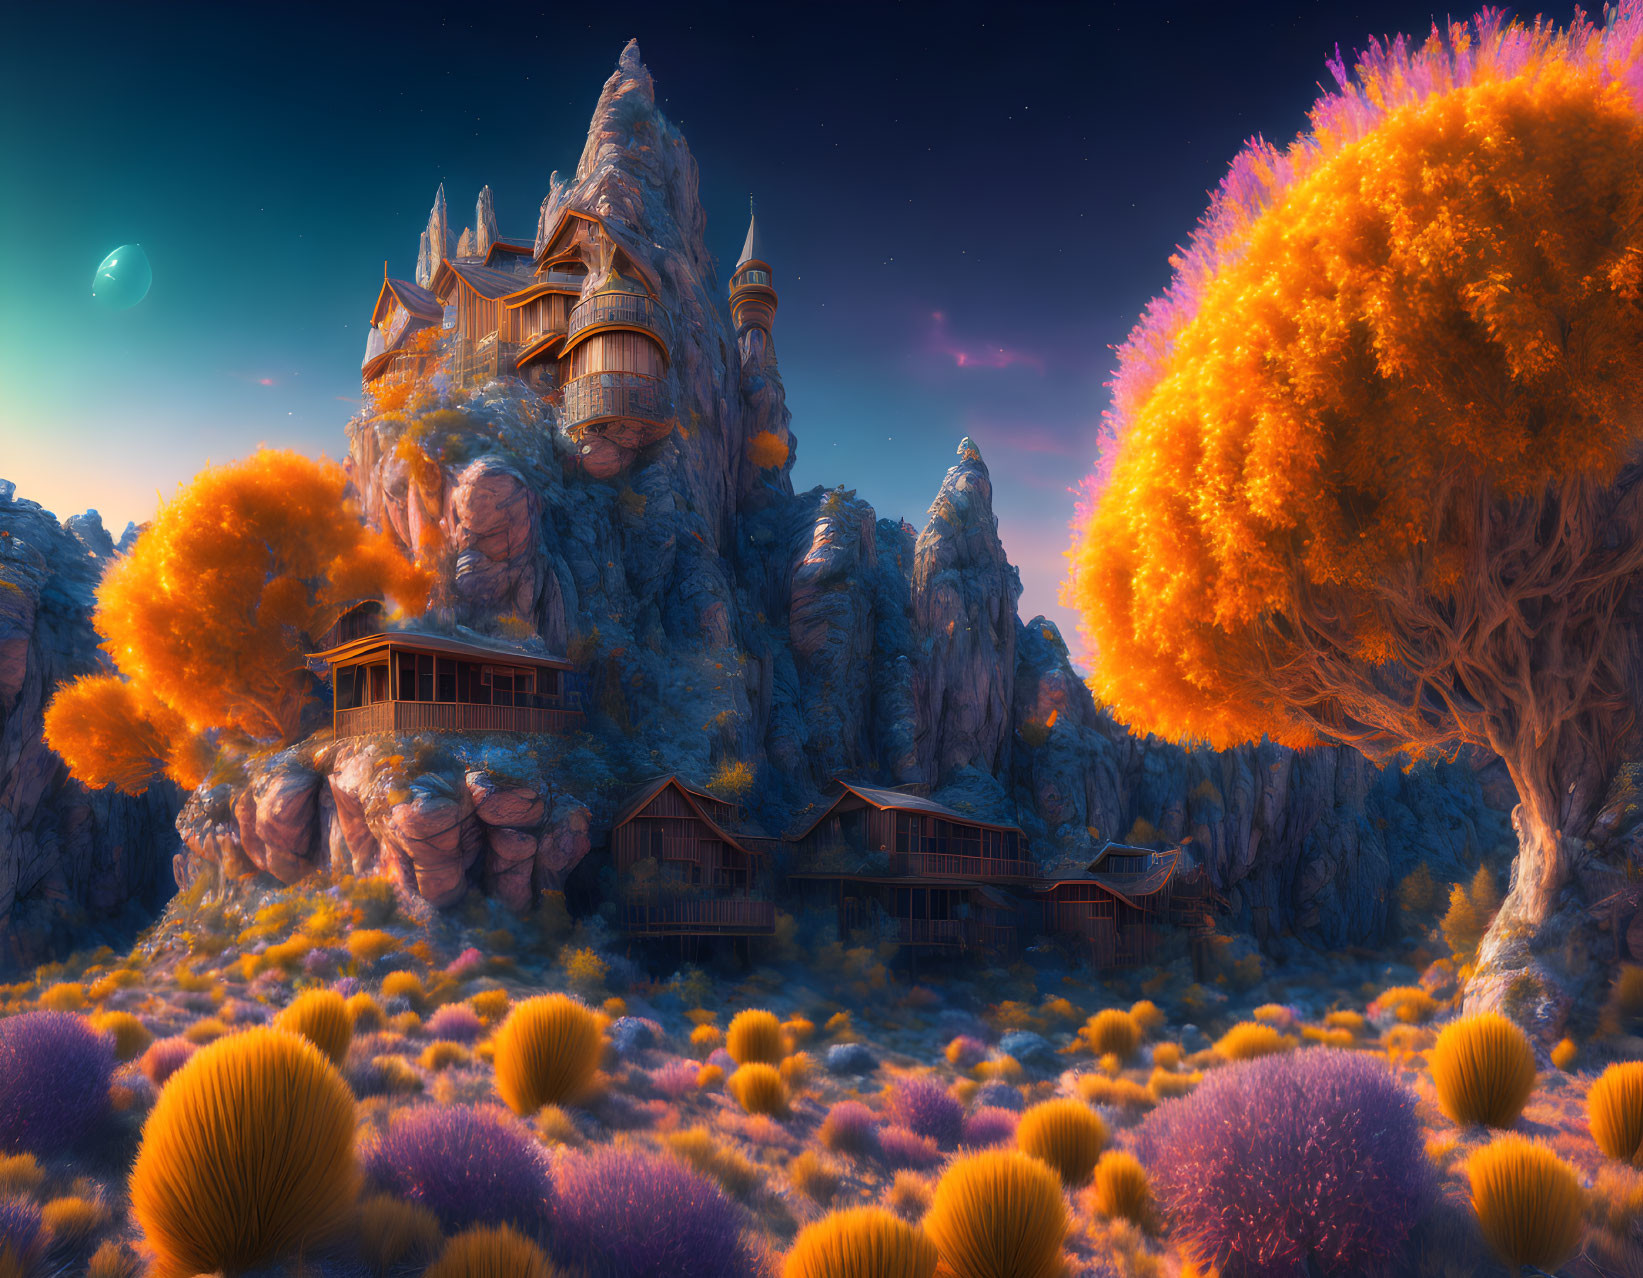 Fantastical landscape with orange foliage, rock formations, embedded structures, moon, twilight sky